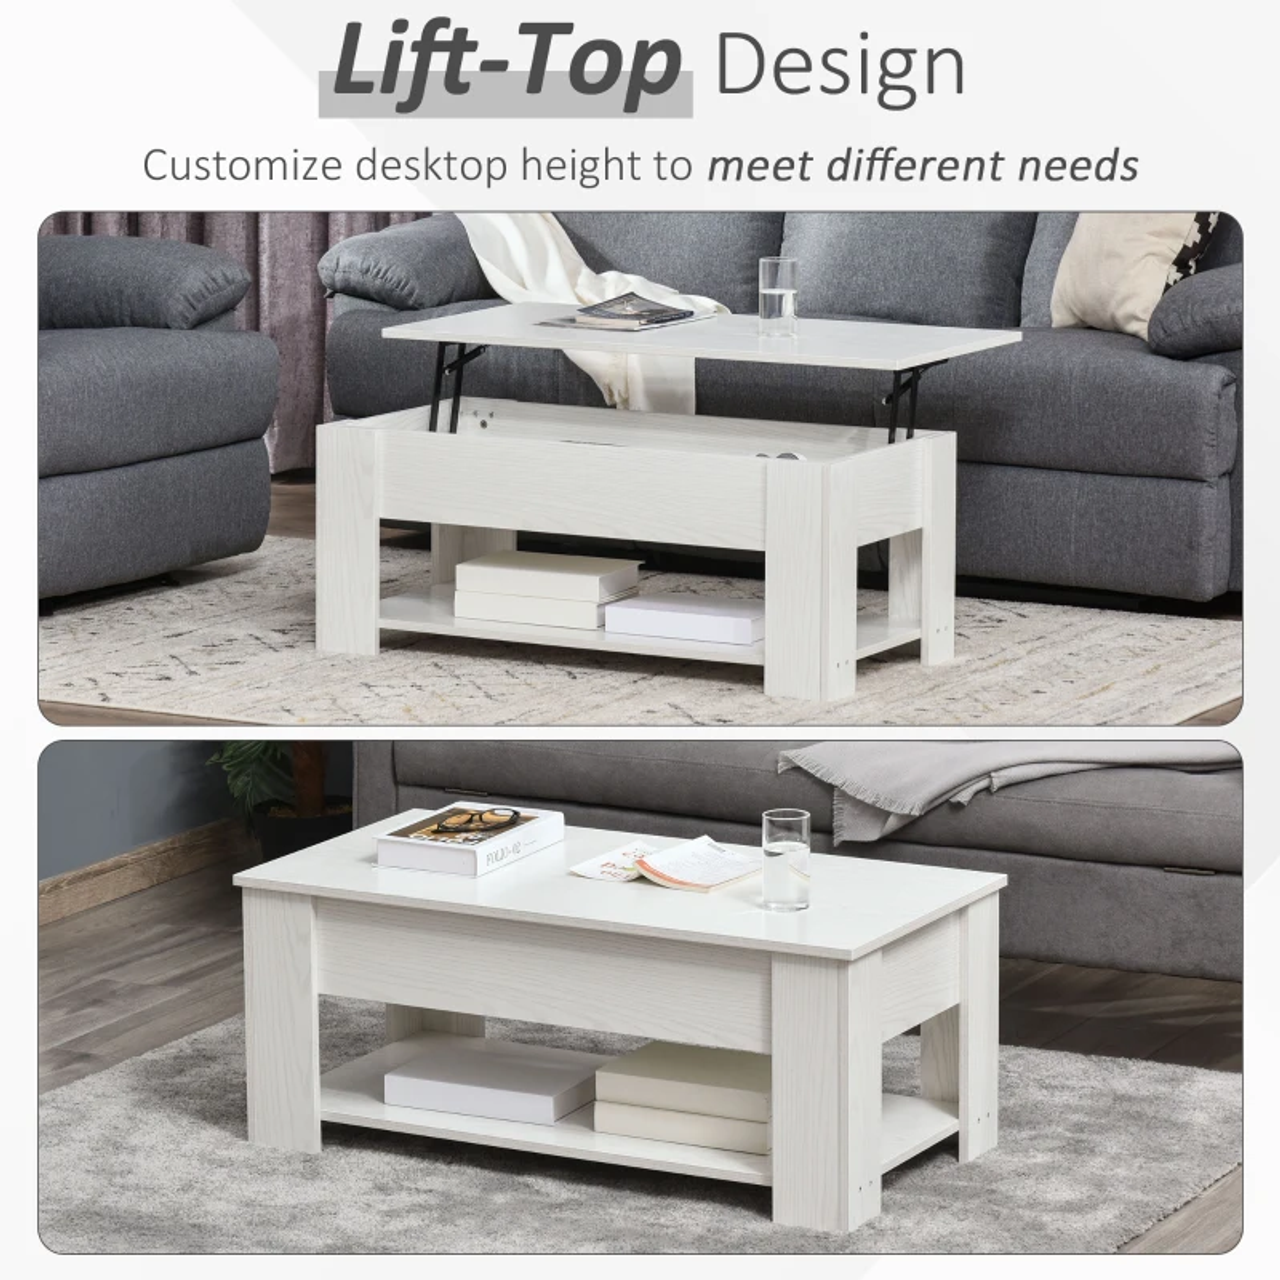 HOMCOM® Coffee Table with Lift-Top Hidden Storage Compartment product image